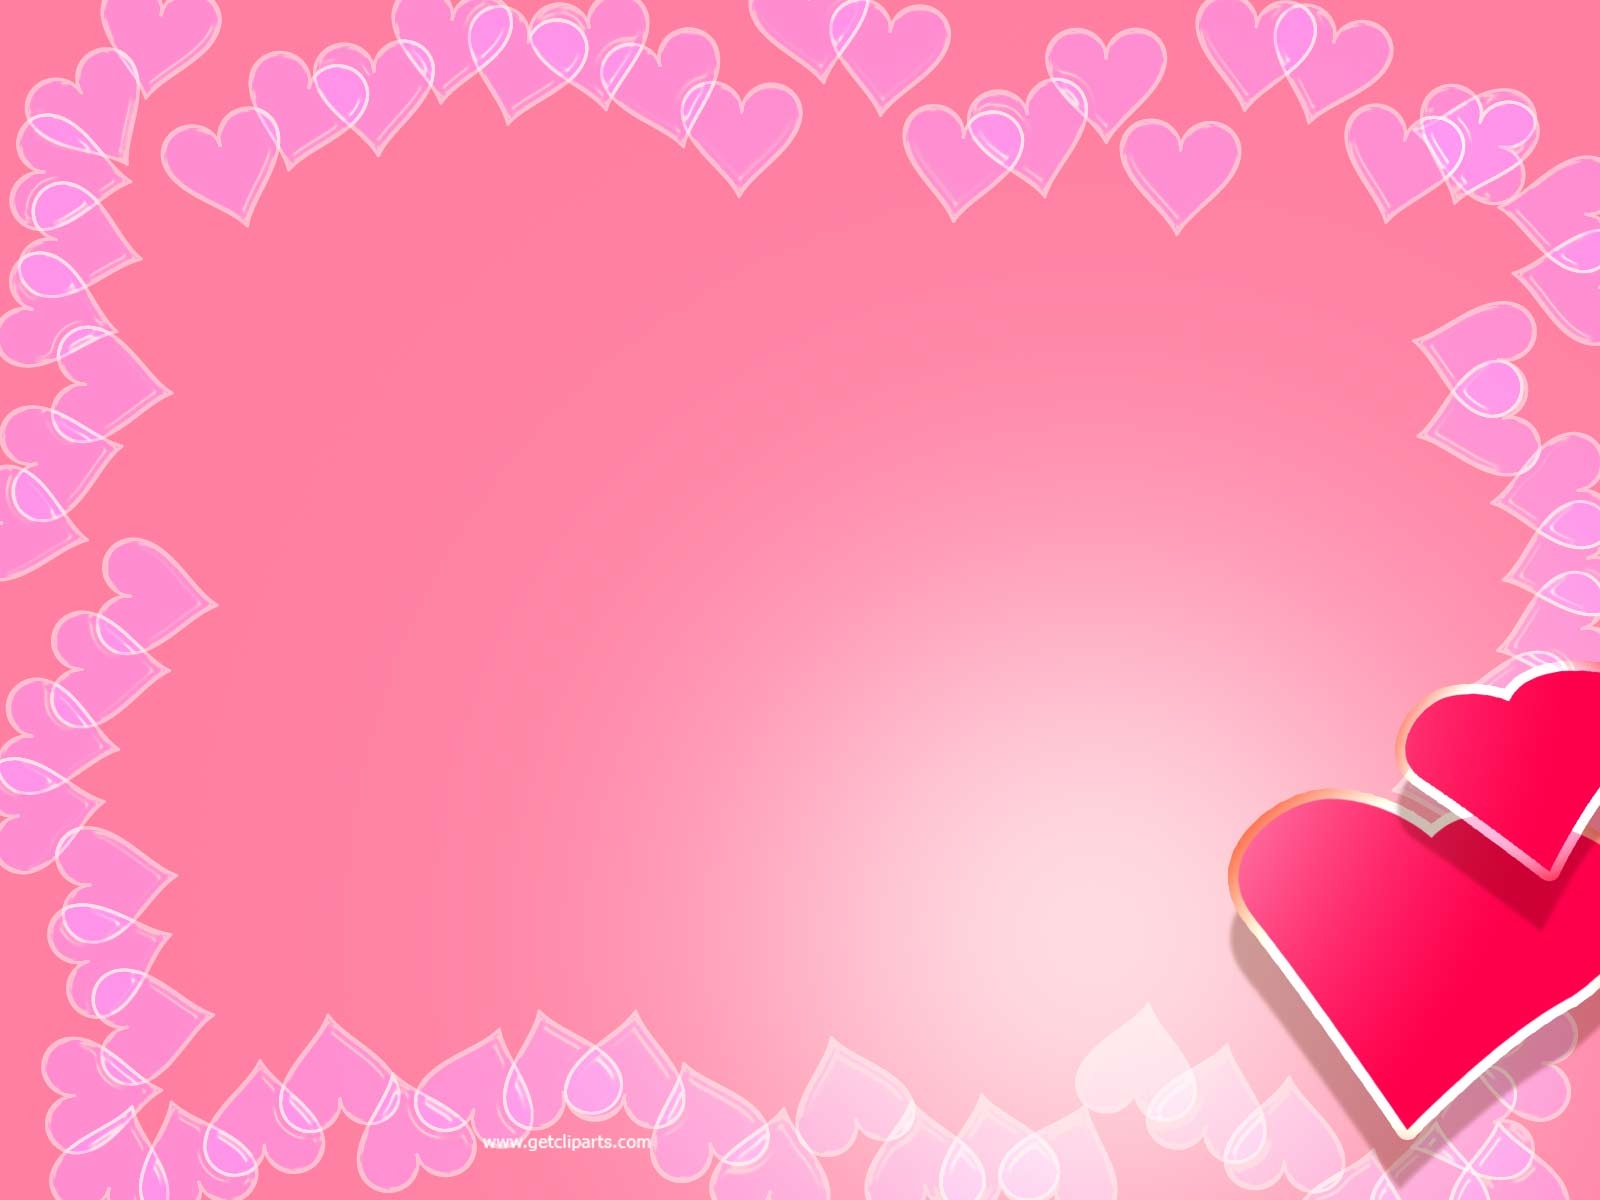 Valentine Backgrounds For Powerpoint – Border And Frame Ppt Throughout Valentine Powerpoint Templates Free